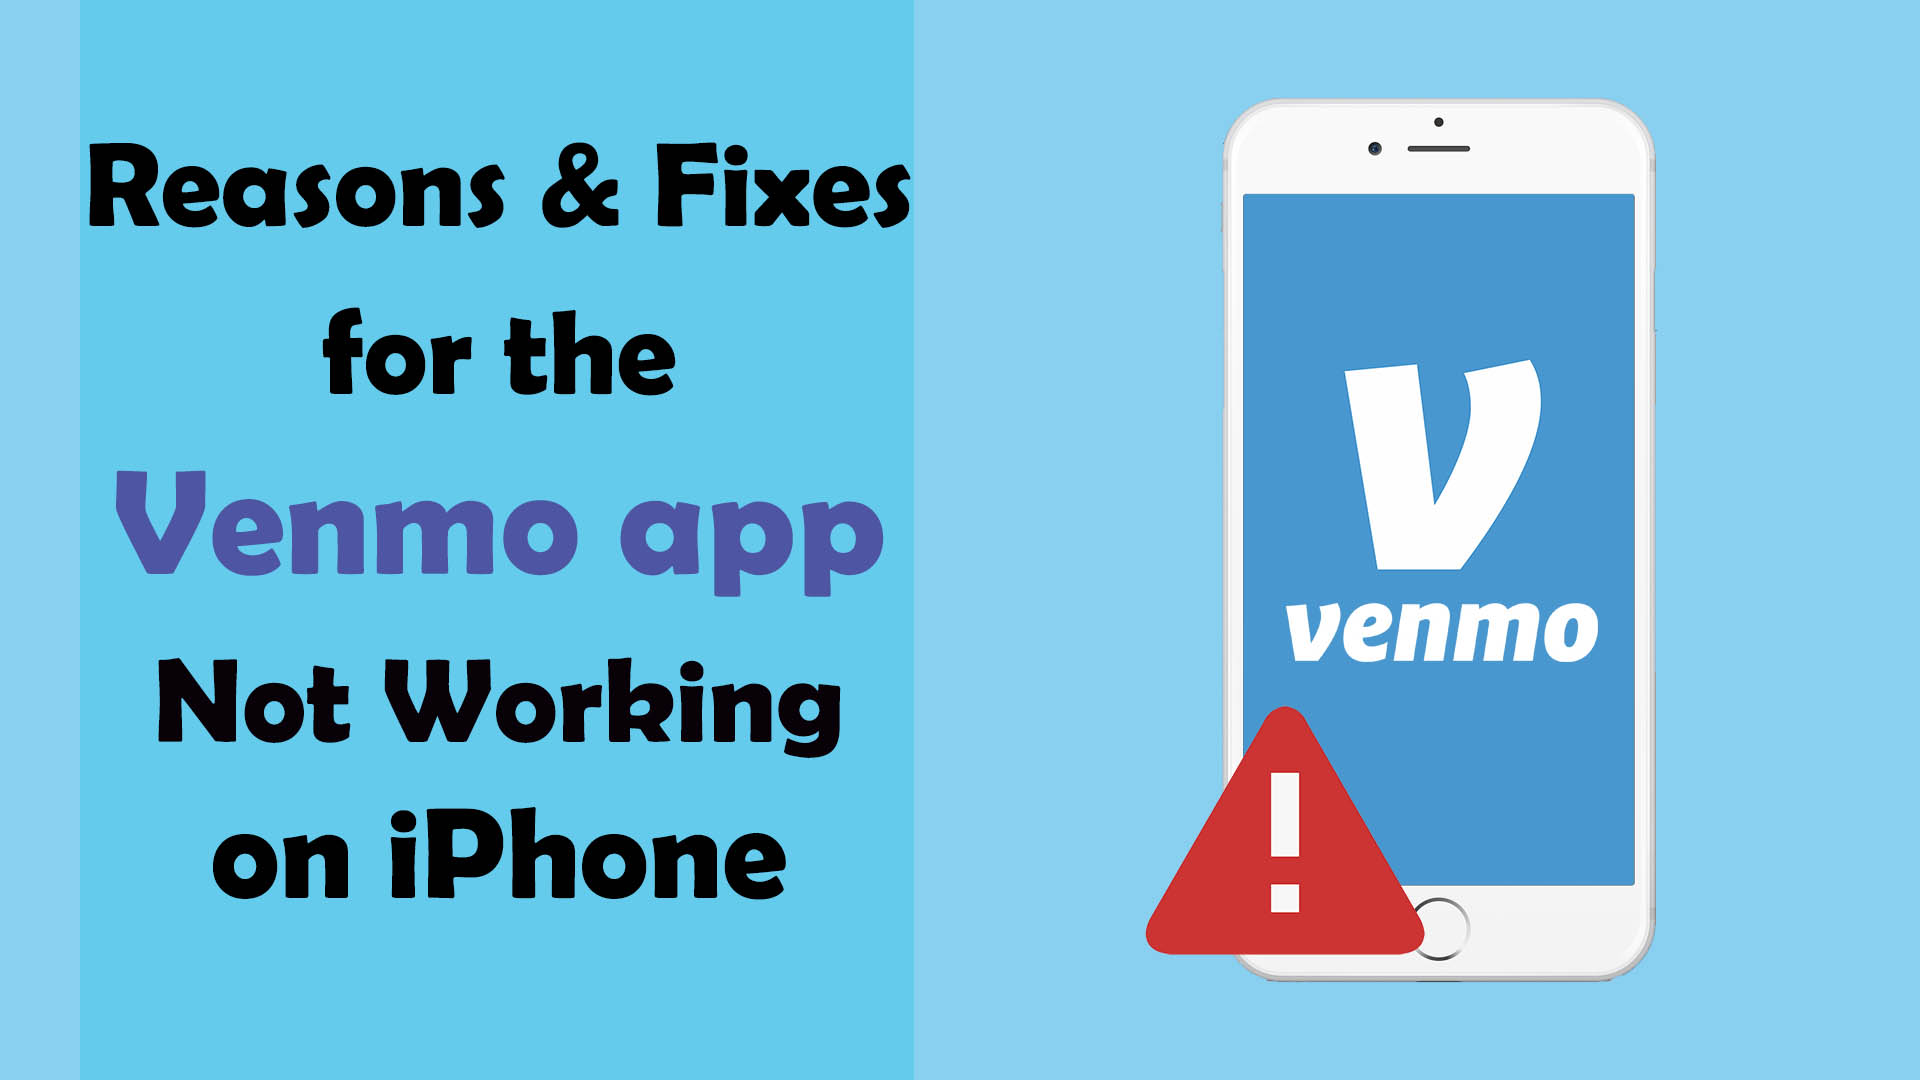 Why is the Venmo App Not Working on iPhone or Android phones?